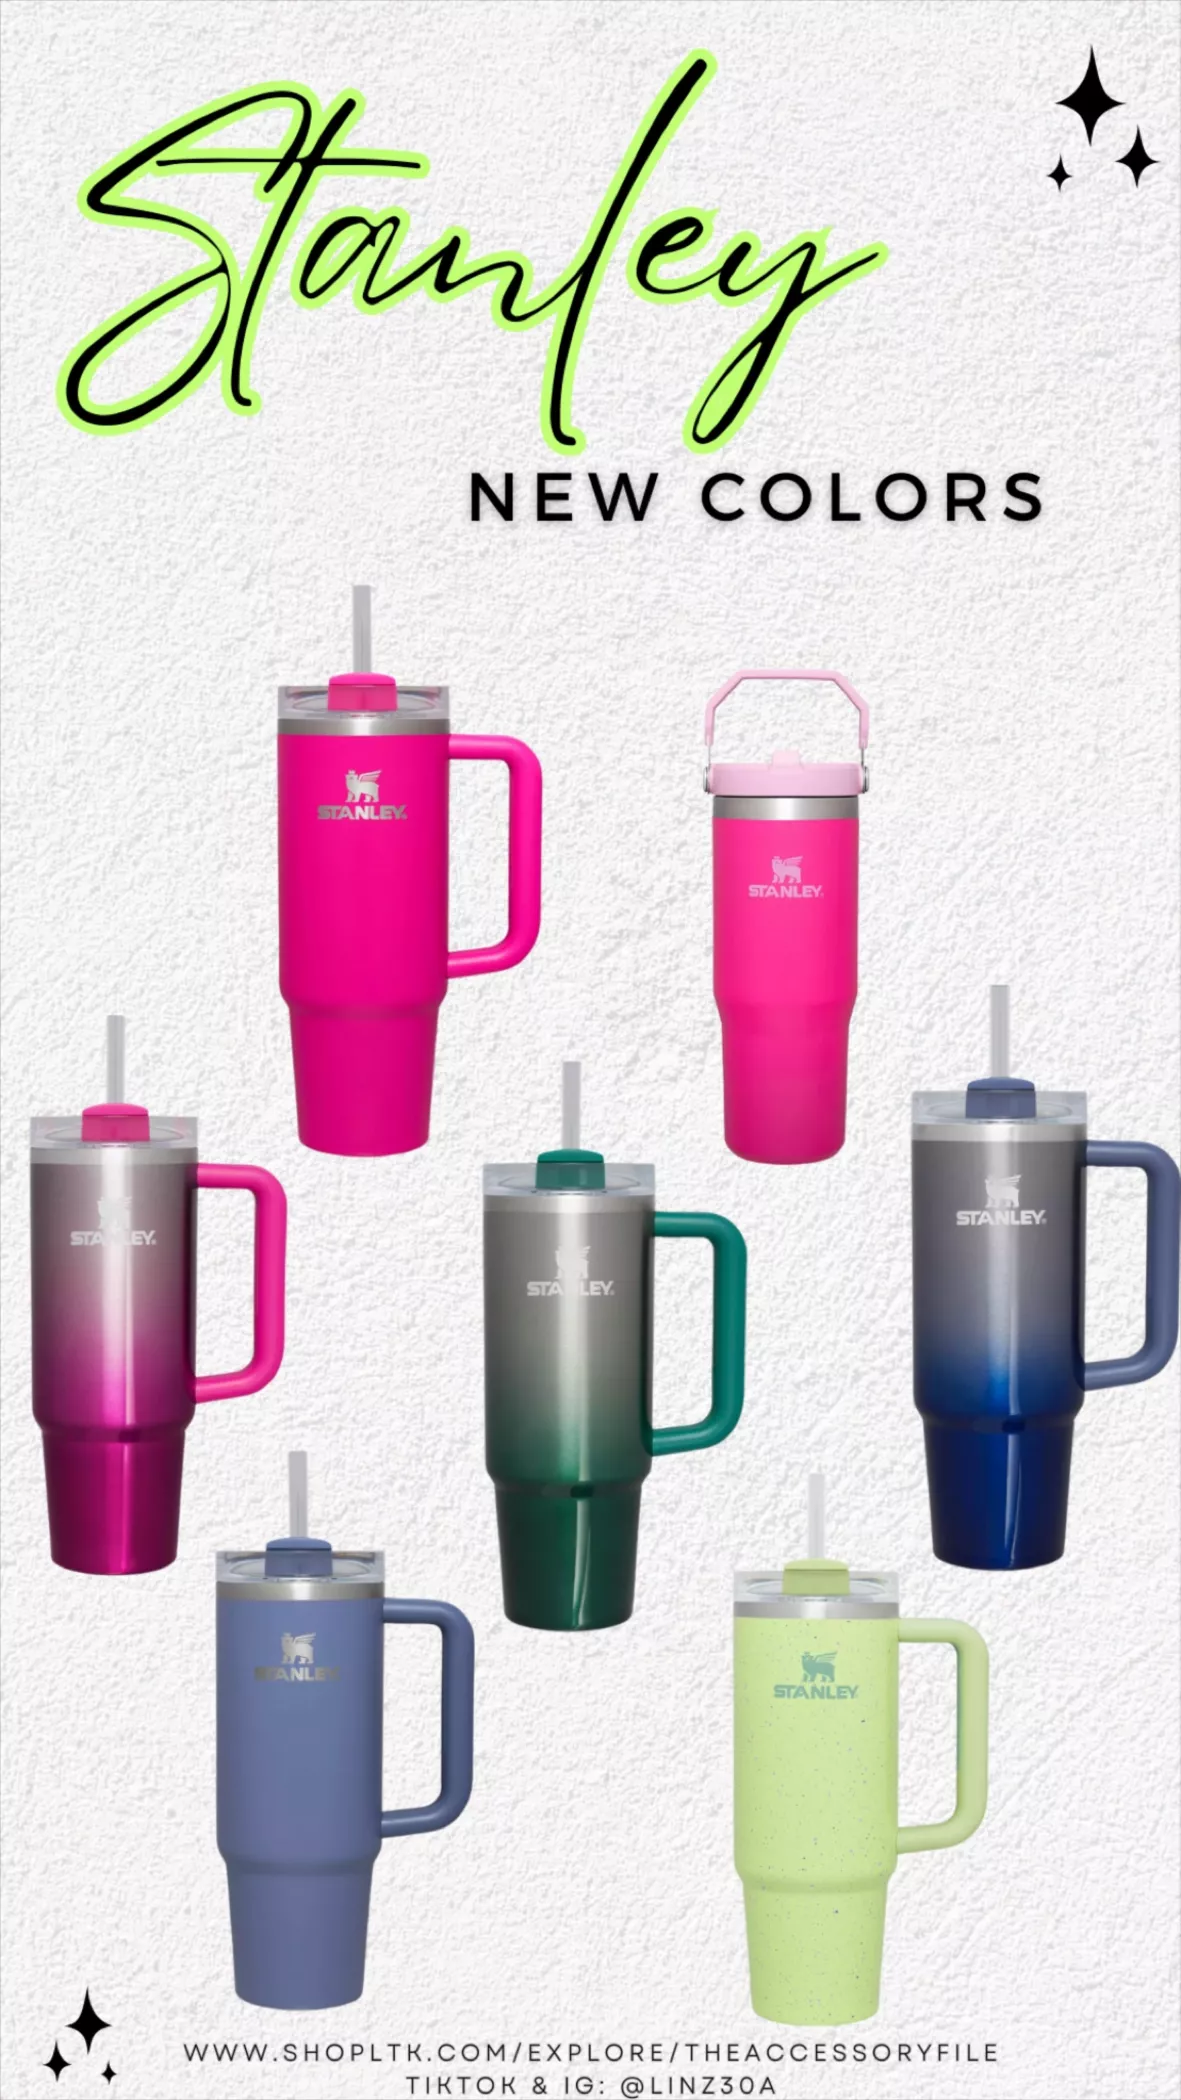 Stanley's Popular IceFlow Tumbler Now Comes in Six New Colors